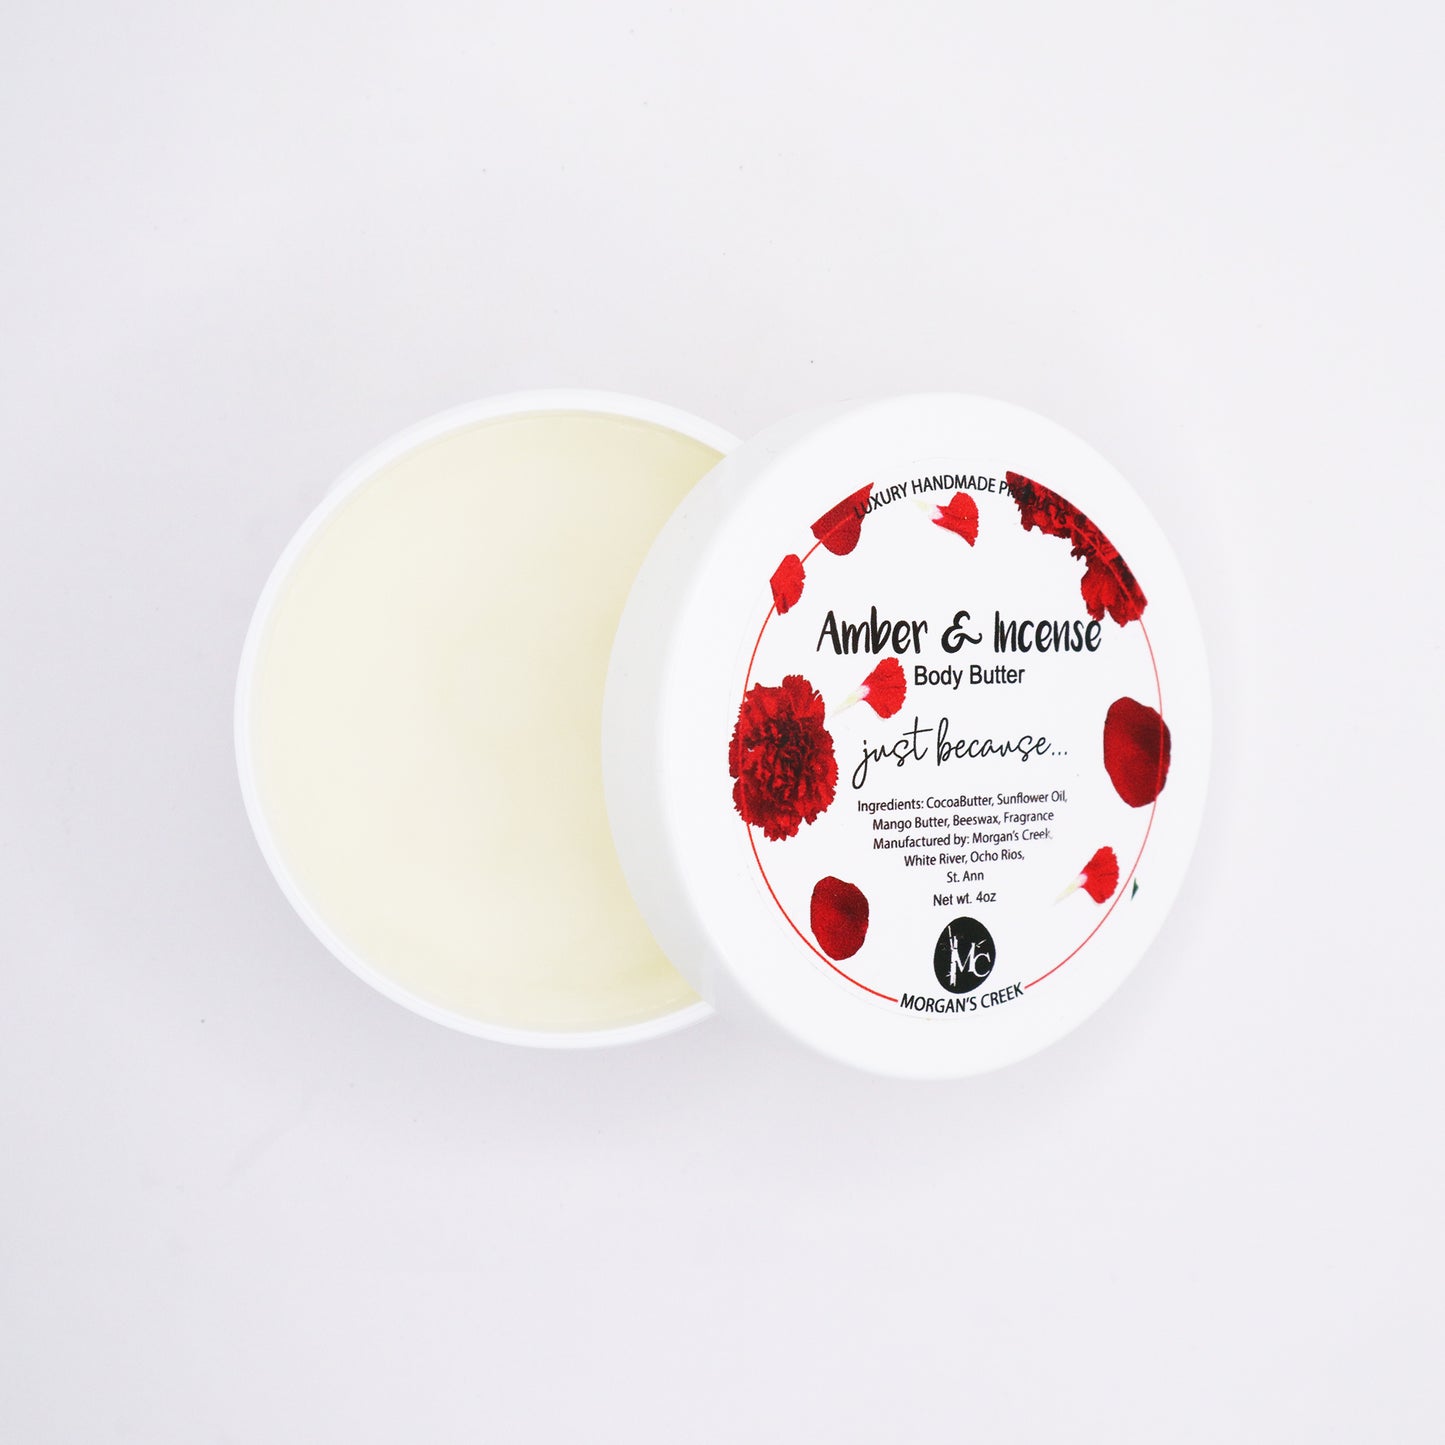 Amber & Incense Body Butter by Morgan's Creek